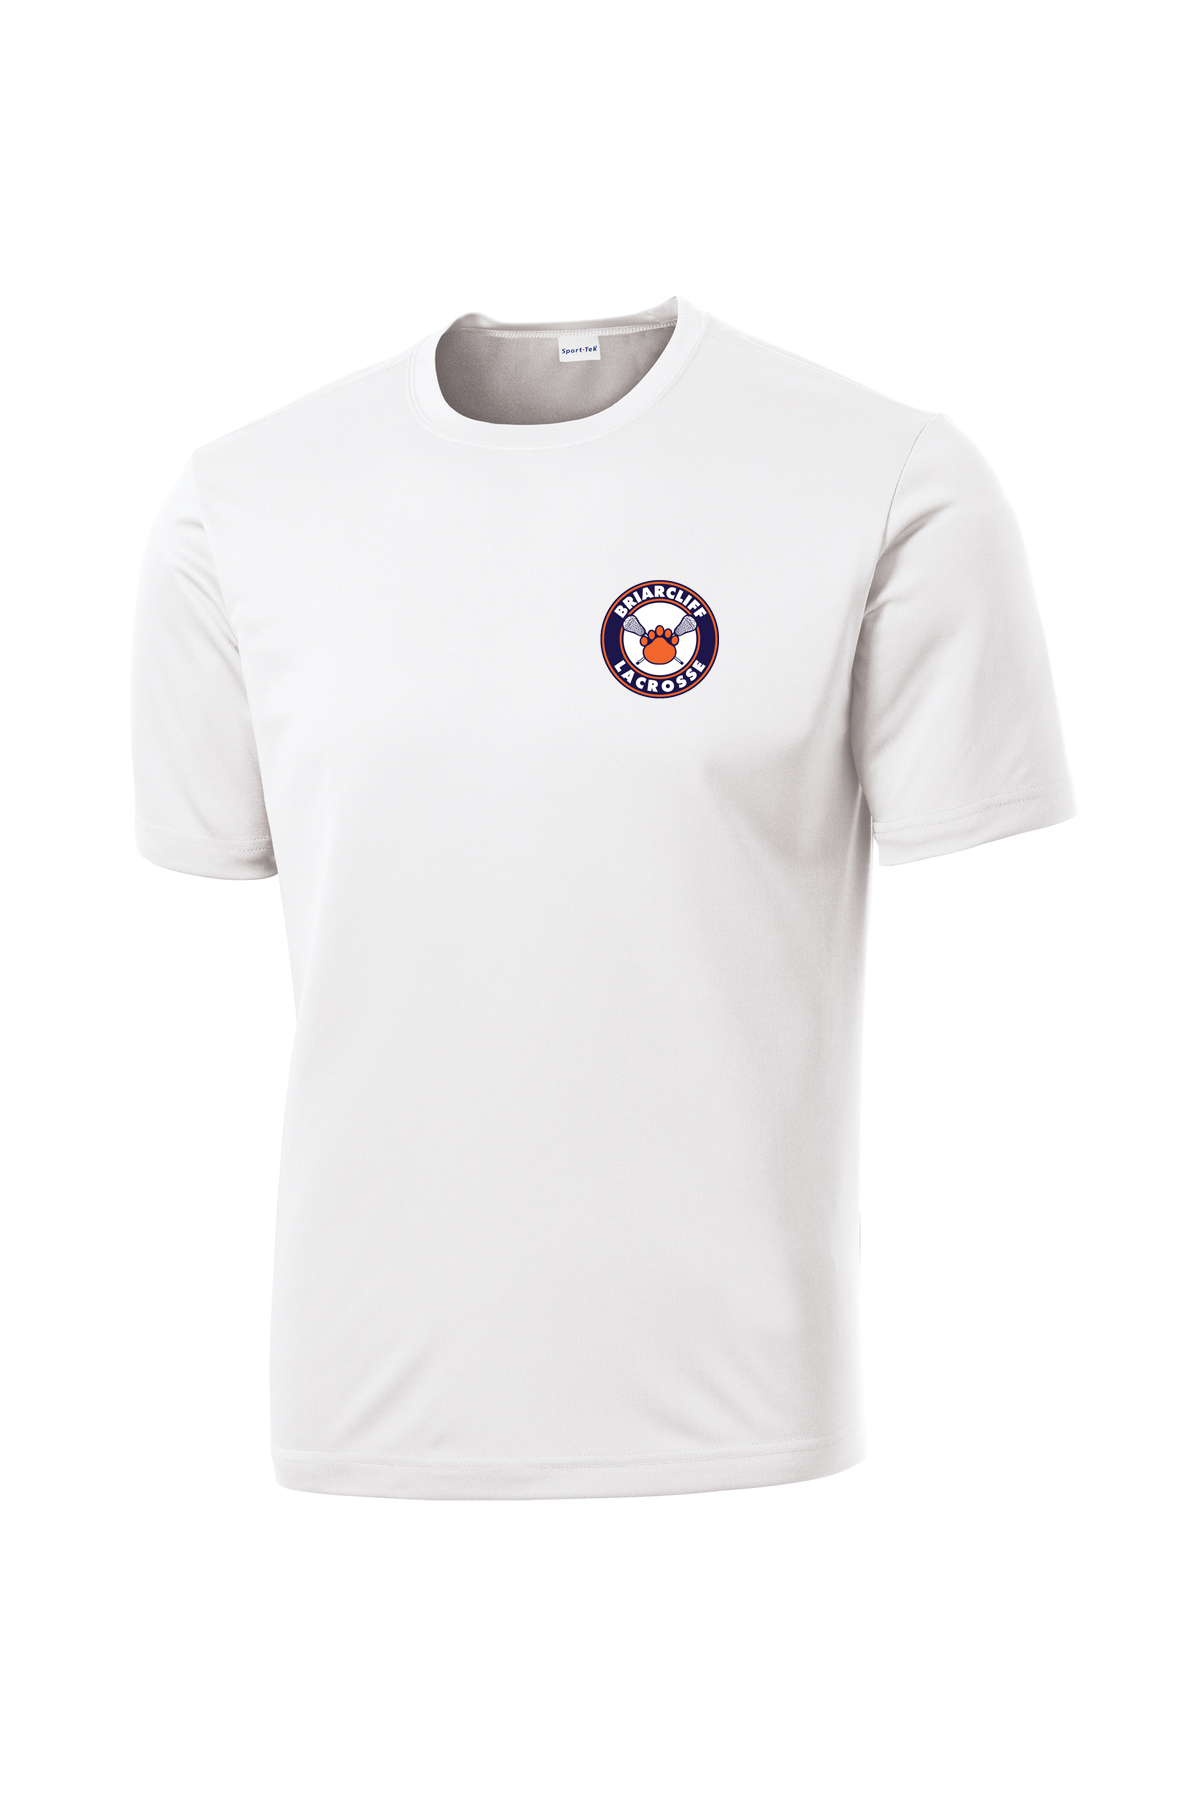 Briarcliff Lacrosse White Performance T-Shirt